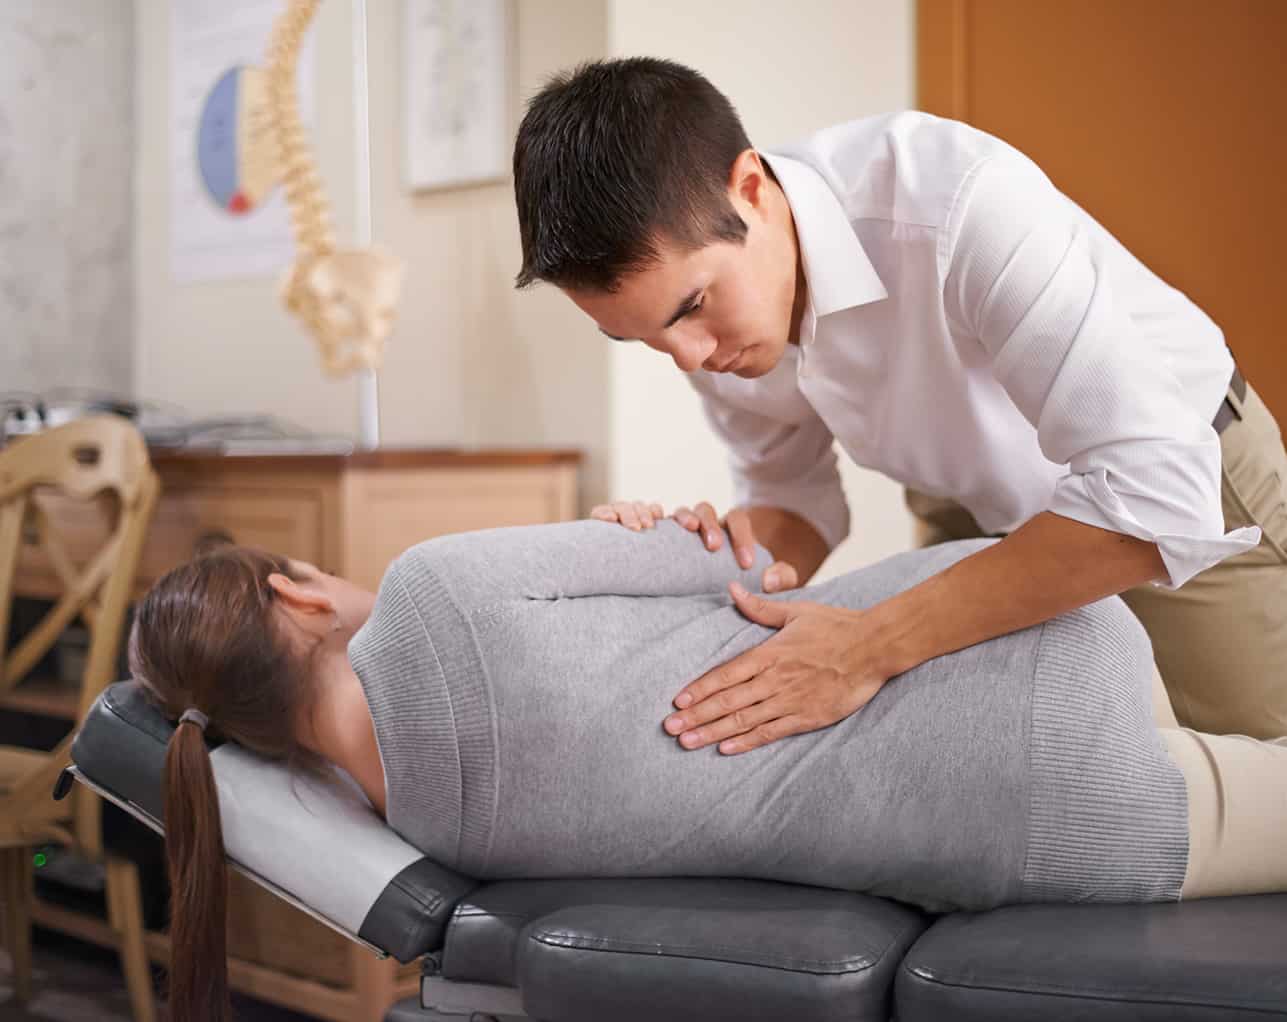 Chiropractic clinic